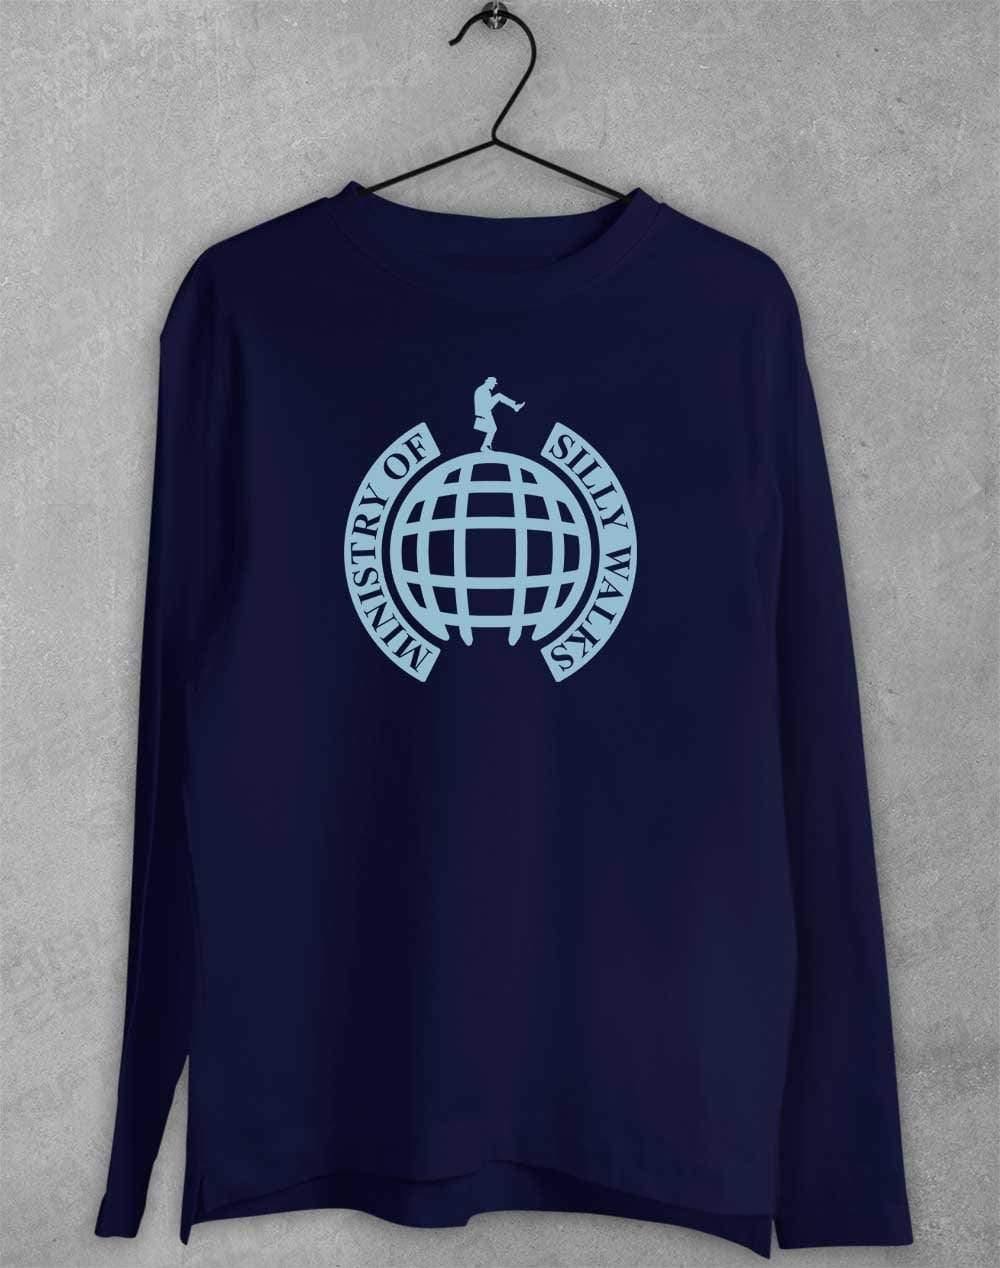 Ministry of Silly Walks Long Sleeve T-Shirt S / Navy  - Off World Tees